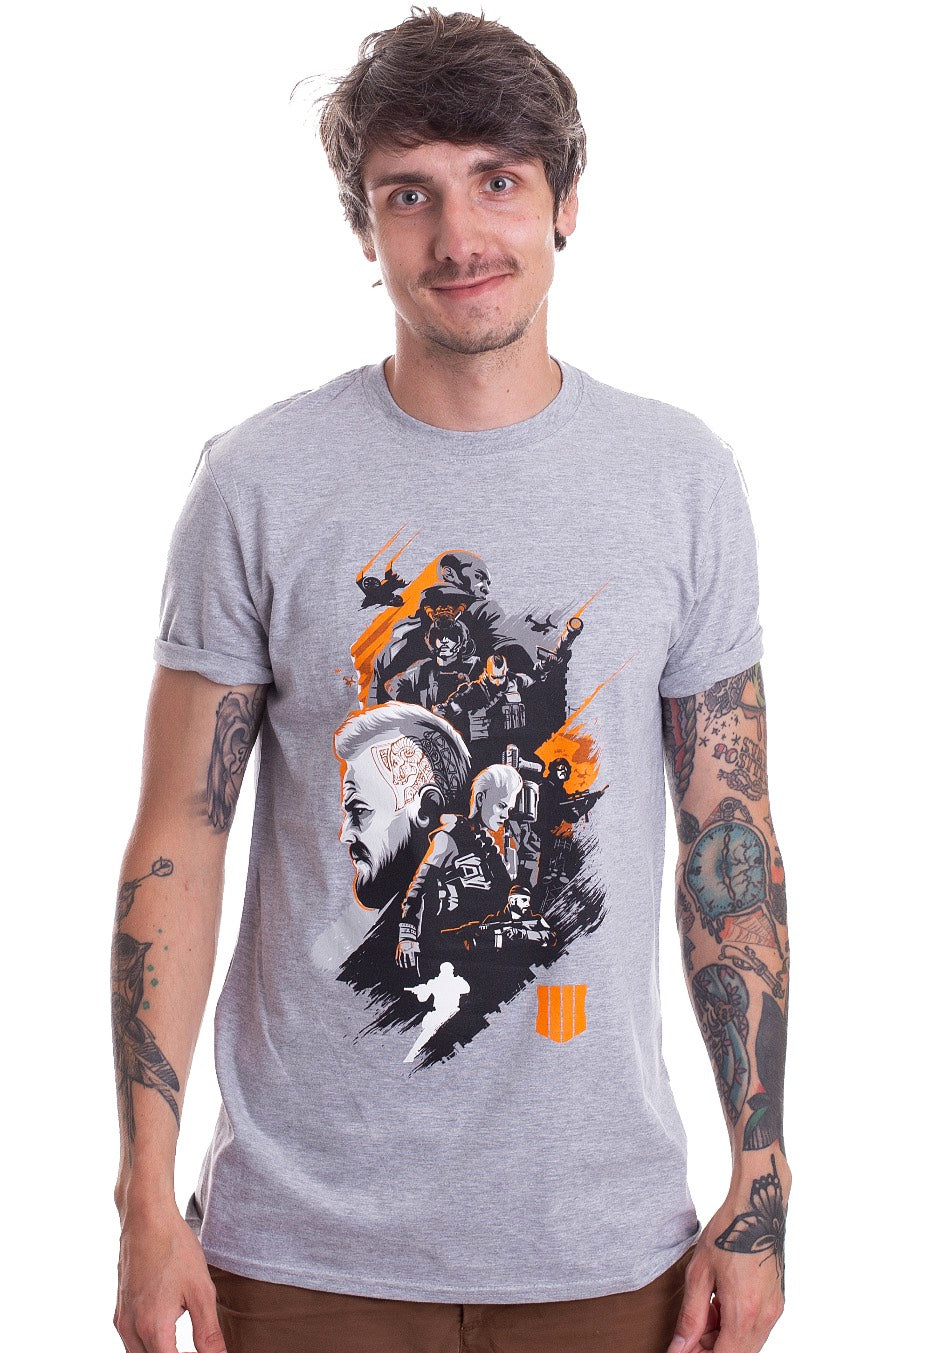 Call Of Duty - Characters Montage Heather Grey - T-Shirt | Men-Image